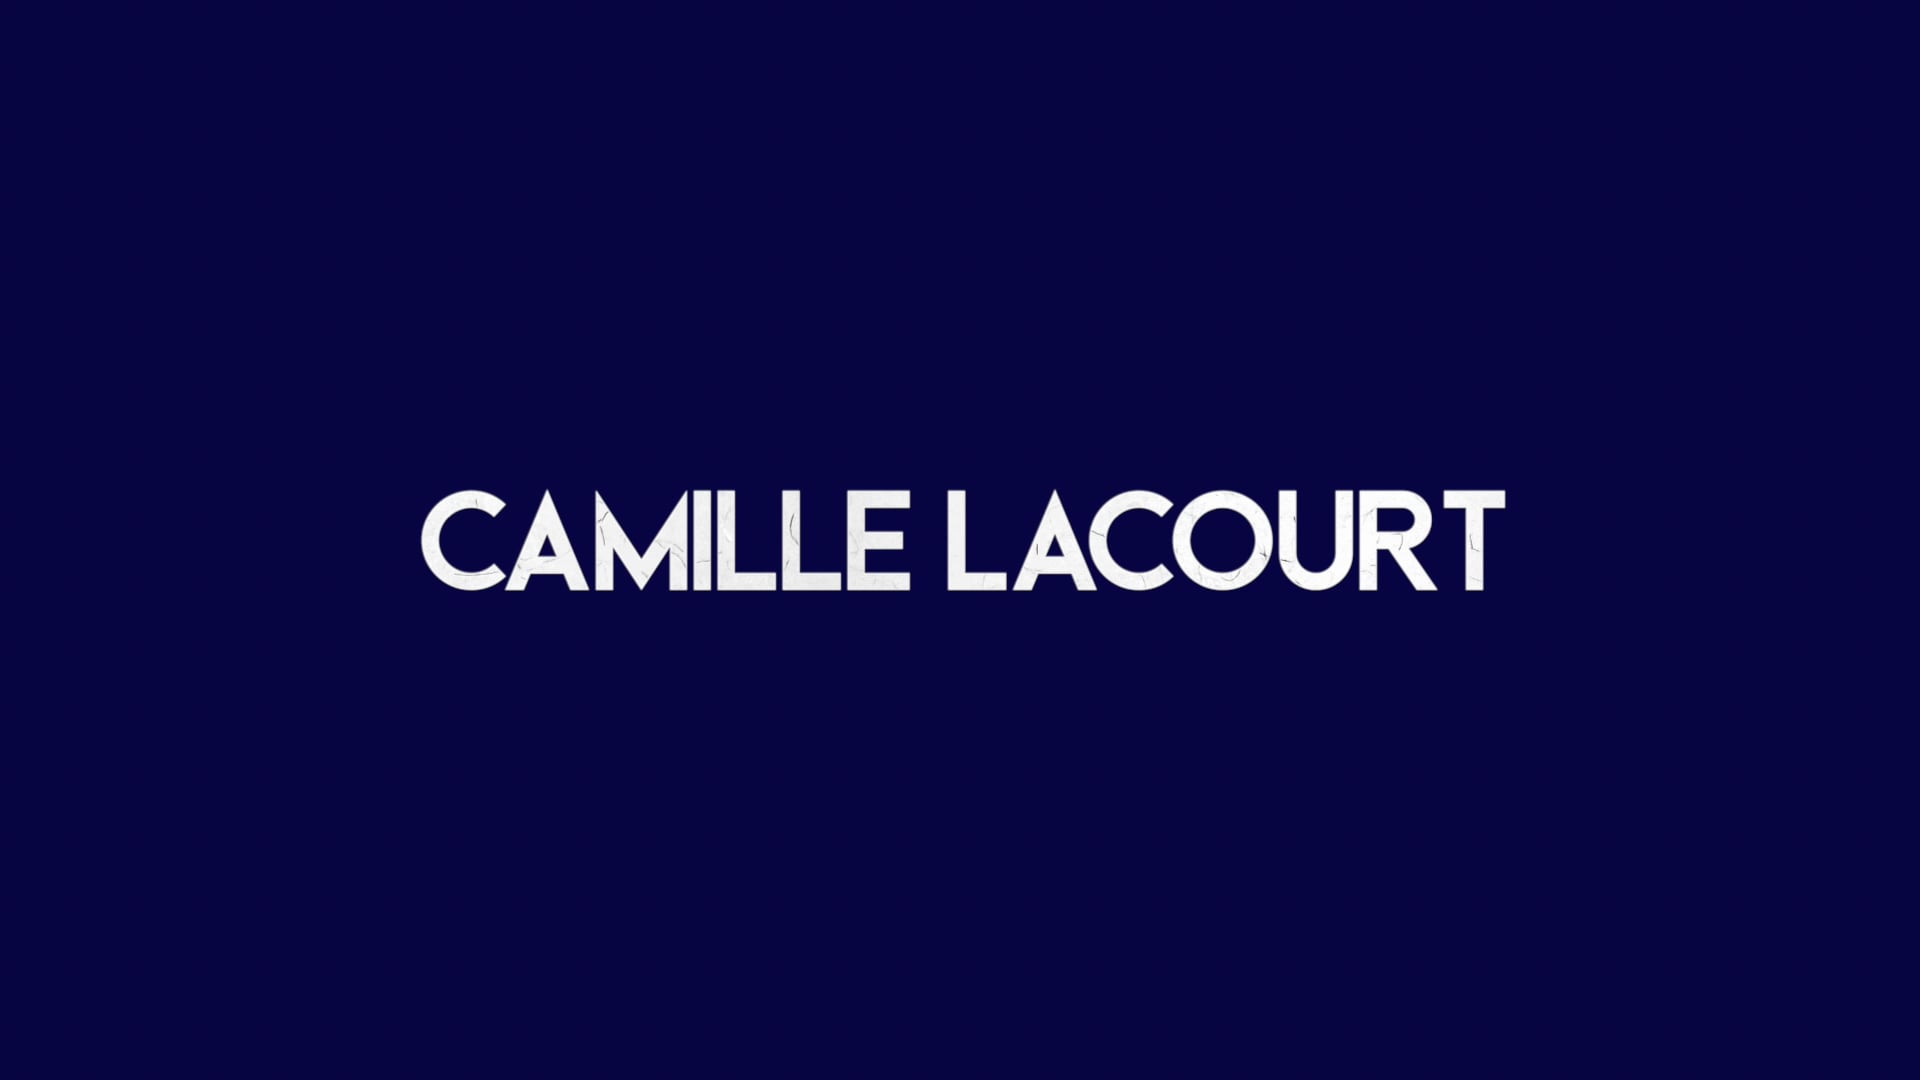 INTERVIEW CAMILLE LACOURT